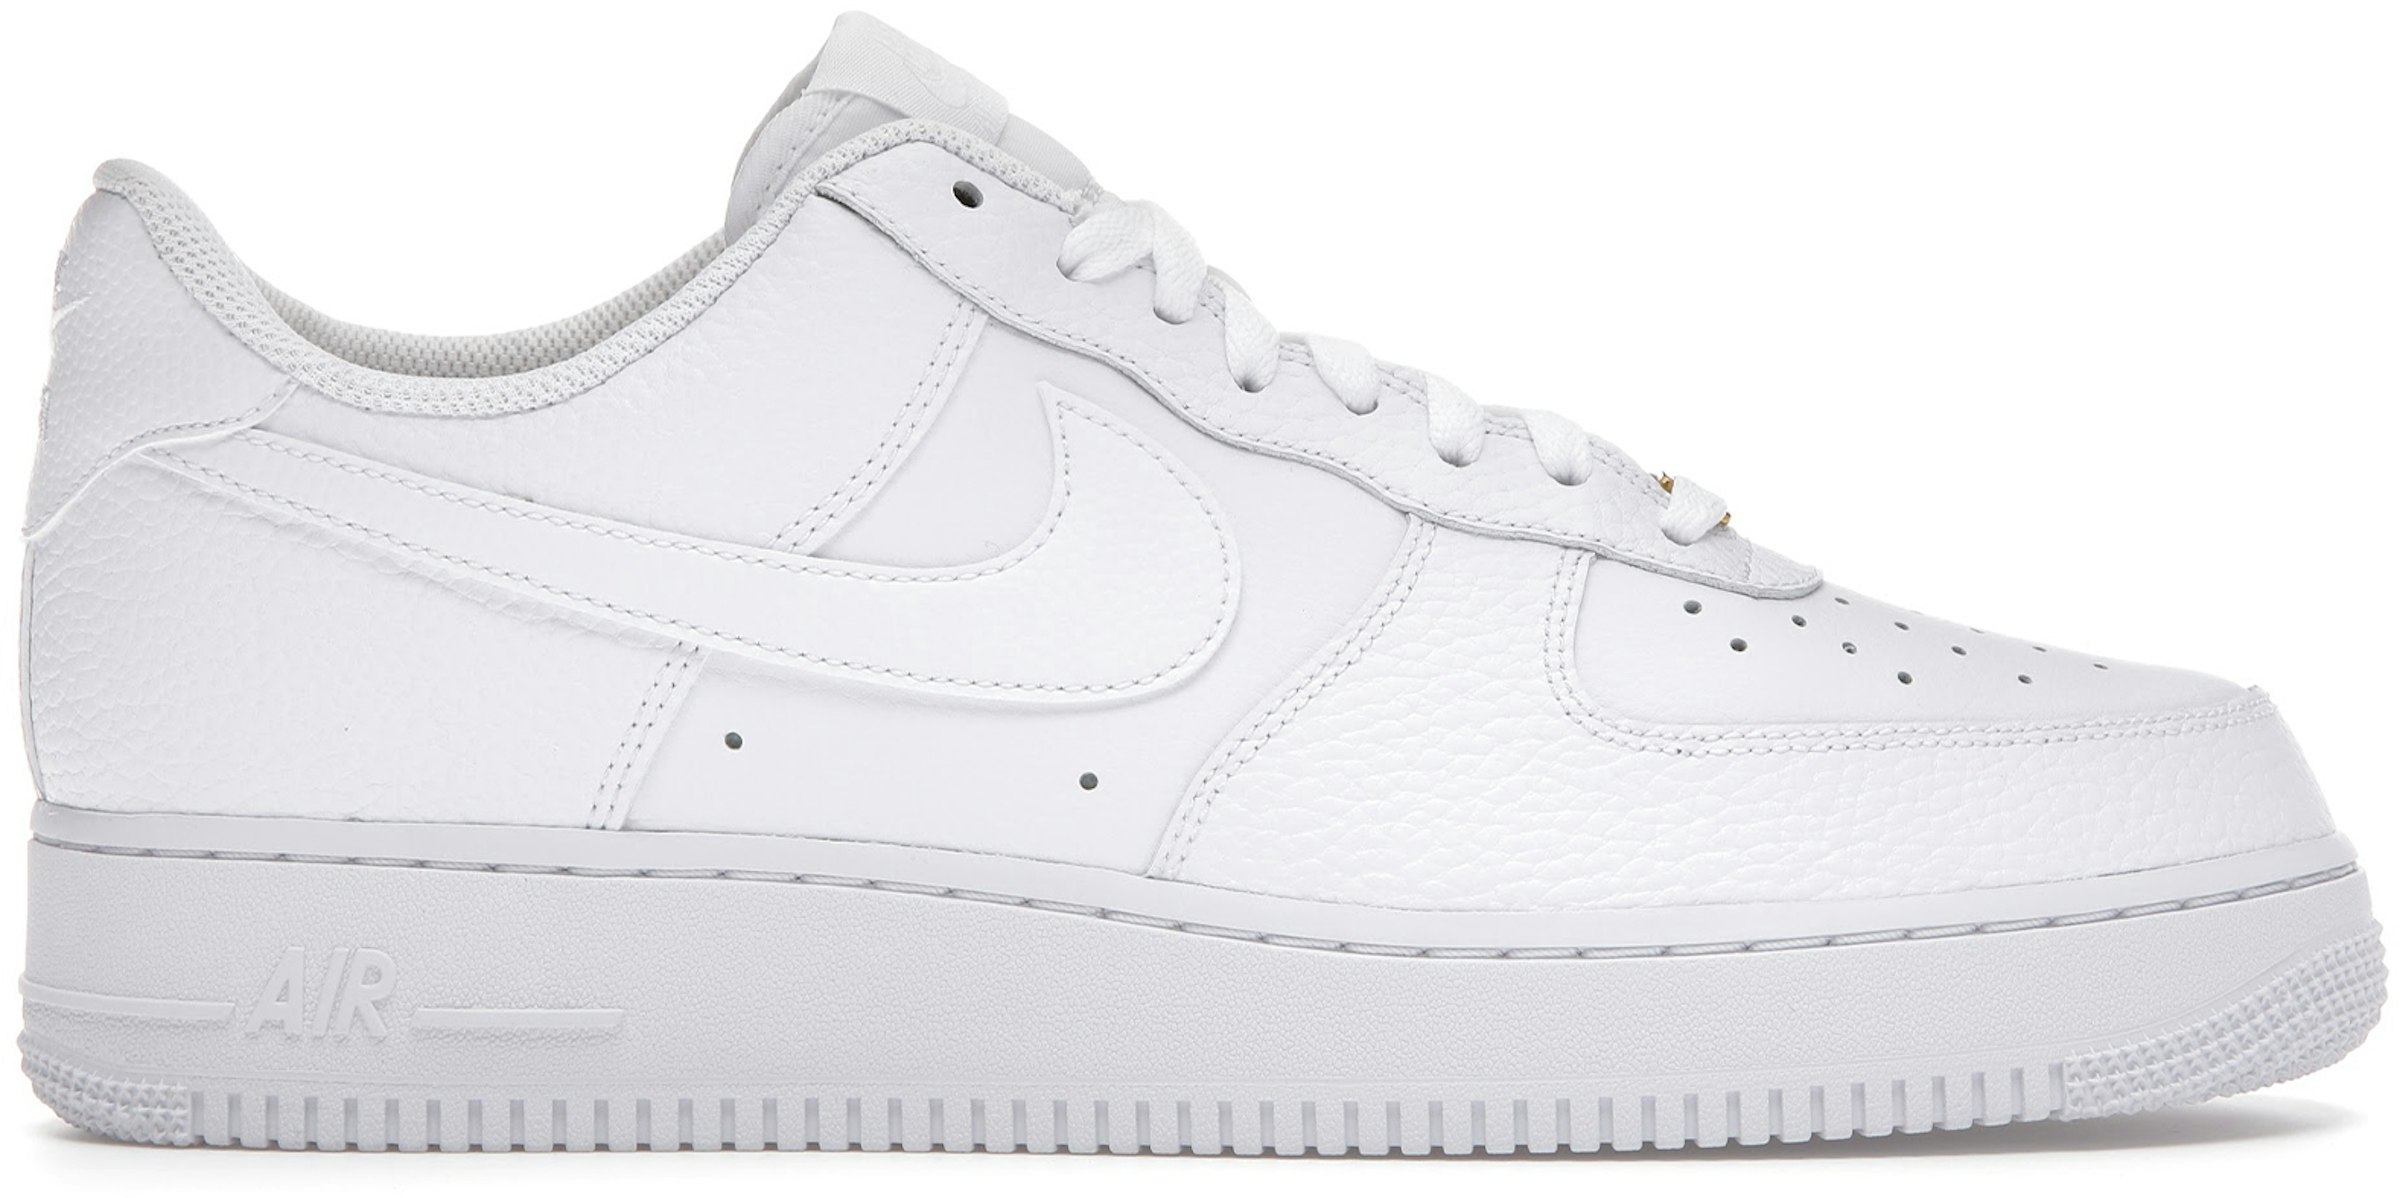 Nike Air Force 1 Low Triple White Tumbled Leather Men's - CZ0326-101